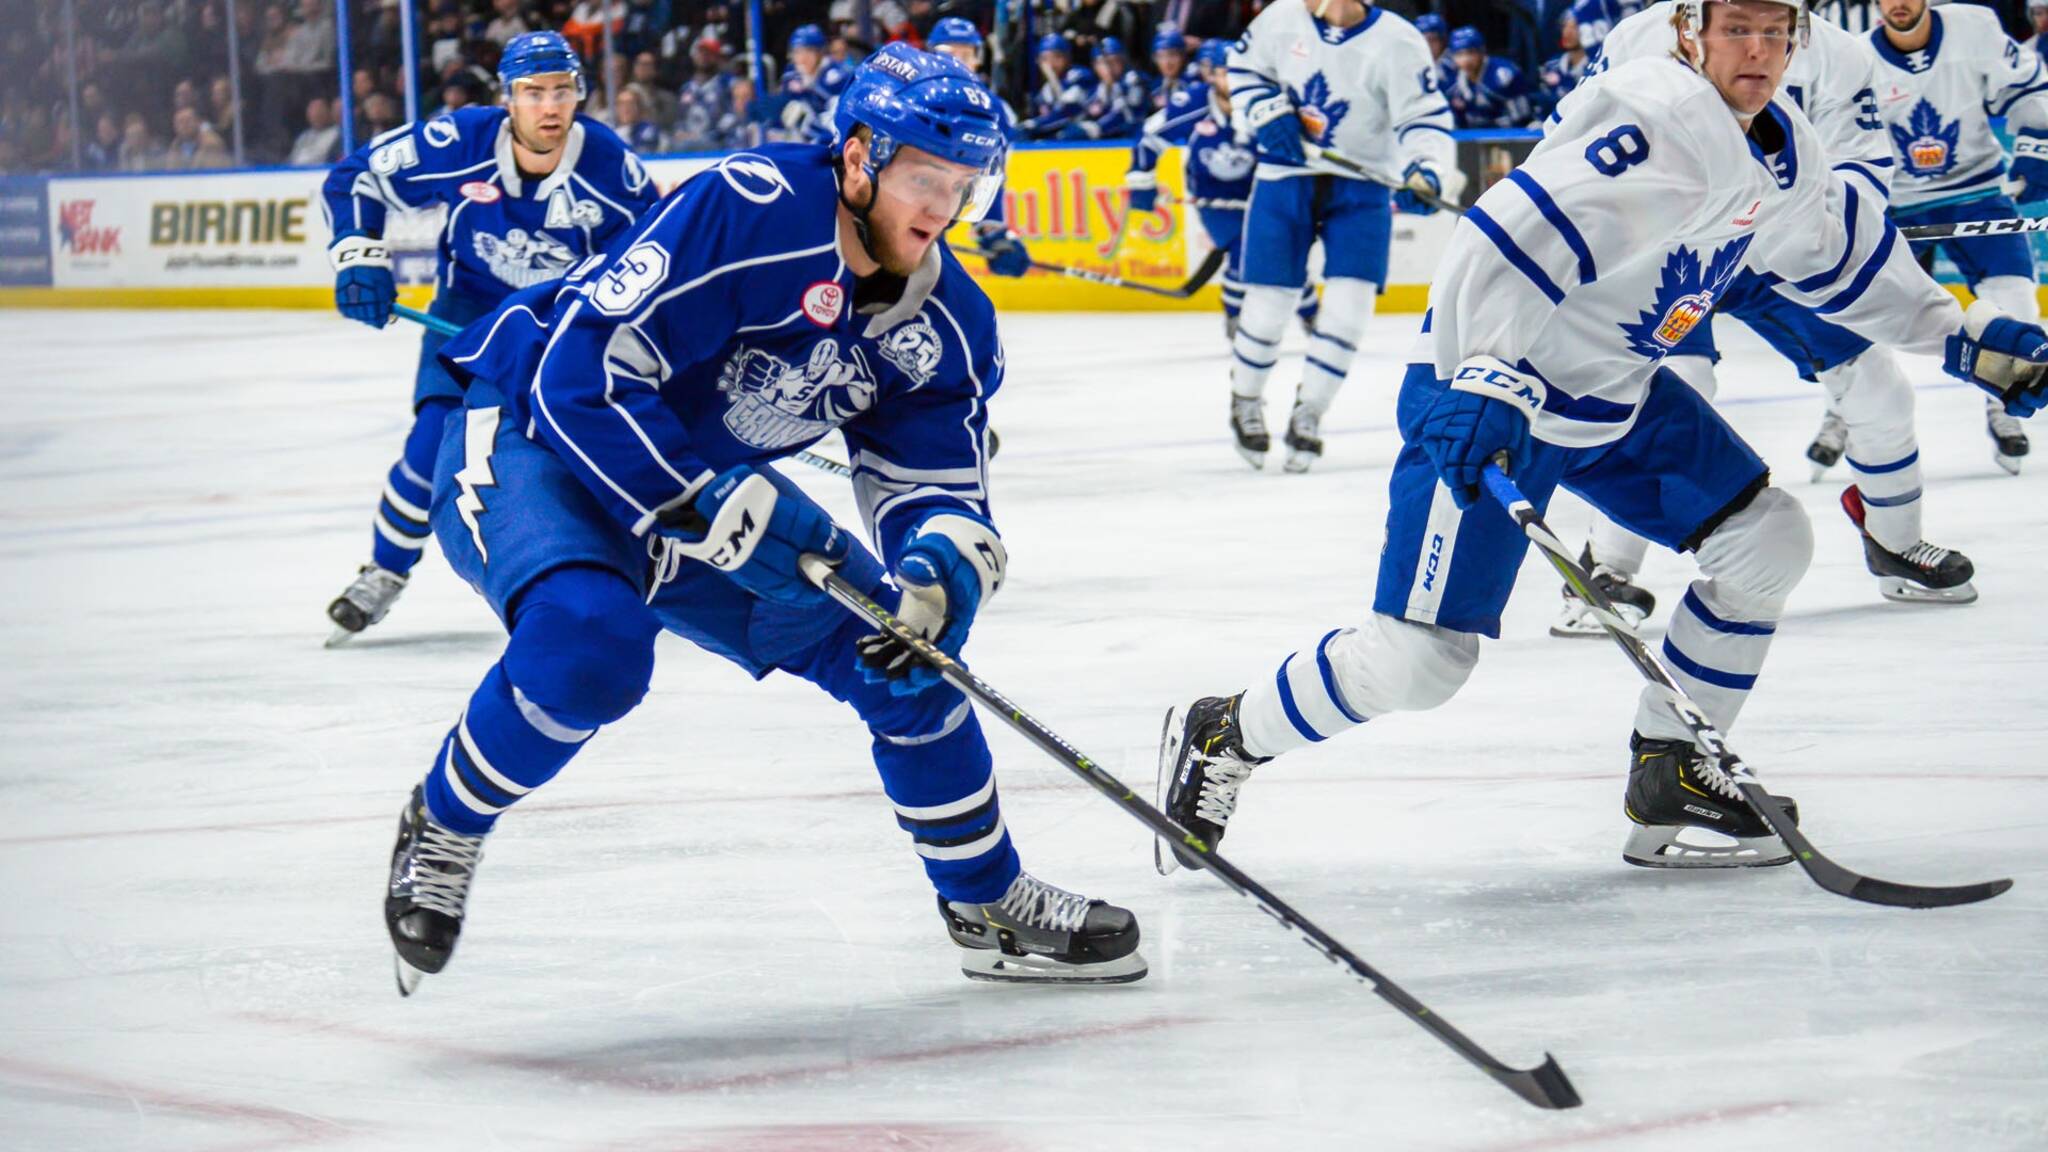 Toronto Marlies Top Utica Comets In Family Day Matchup – Toronto Marlies